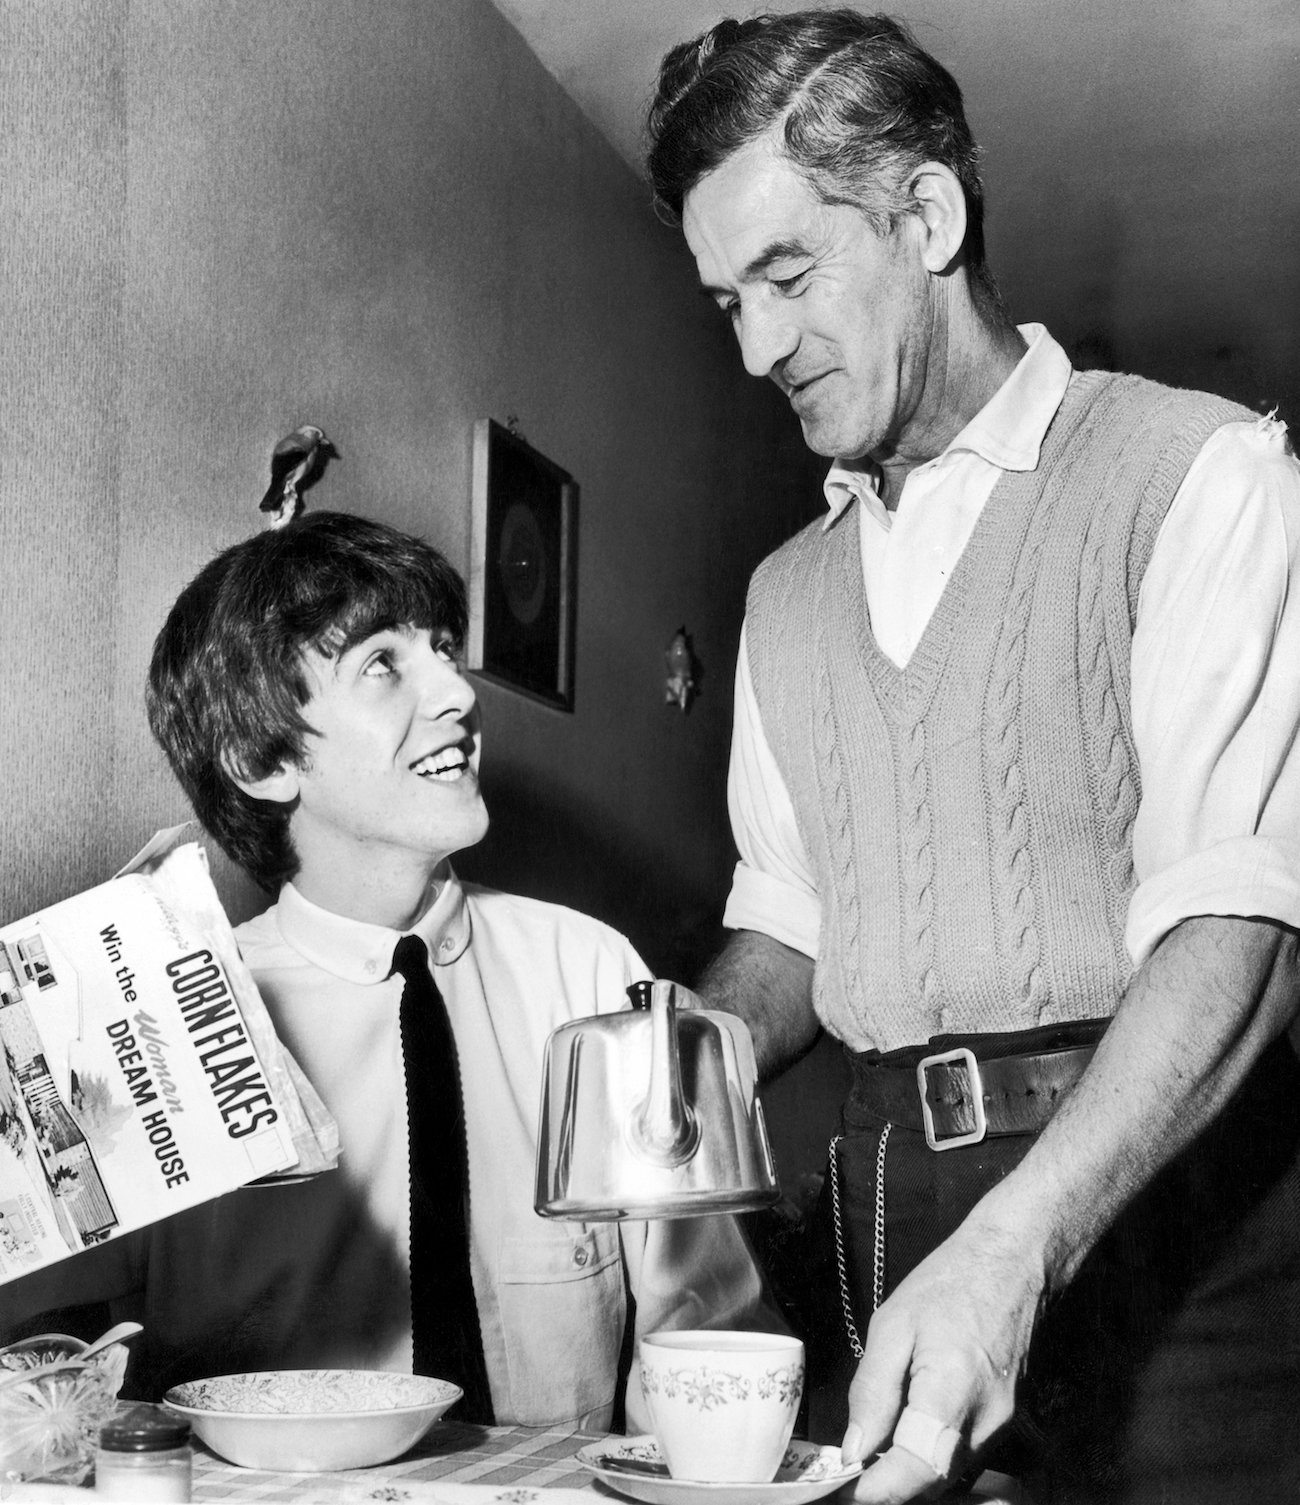 George Harrison's dad Harold pouring him tea in 1963.